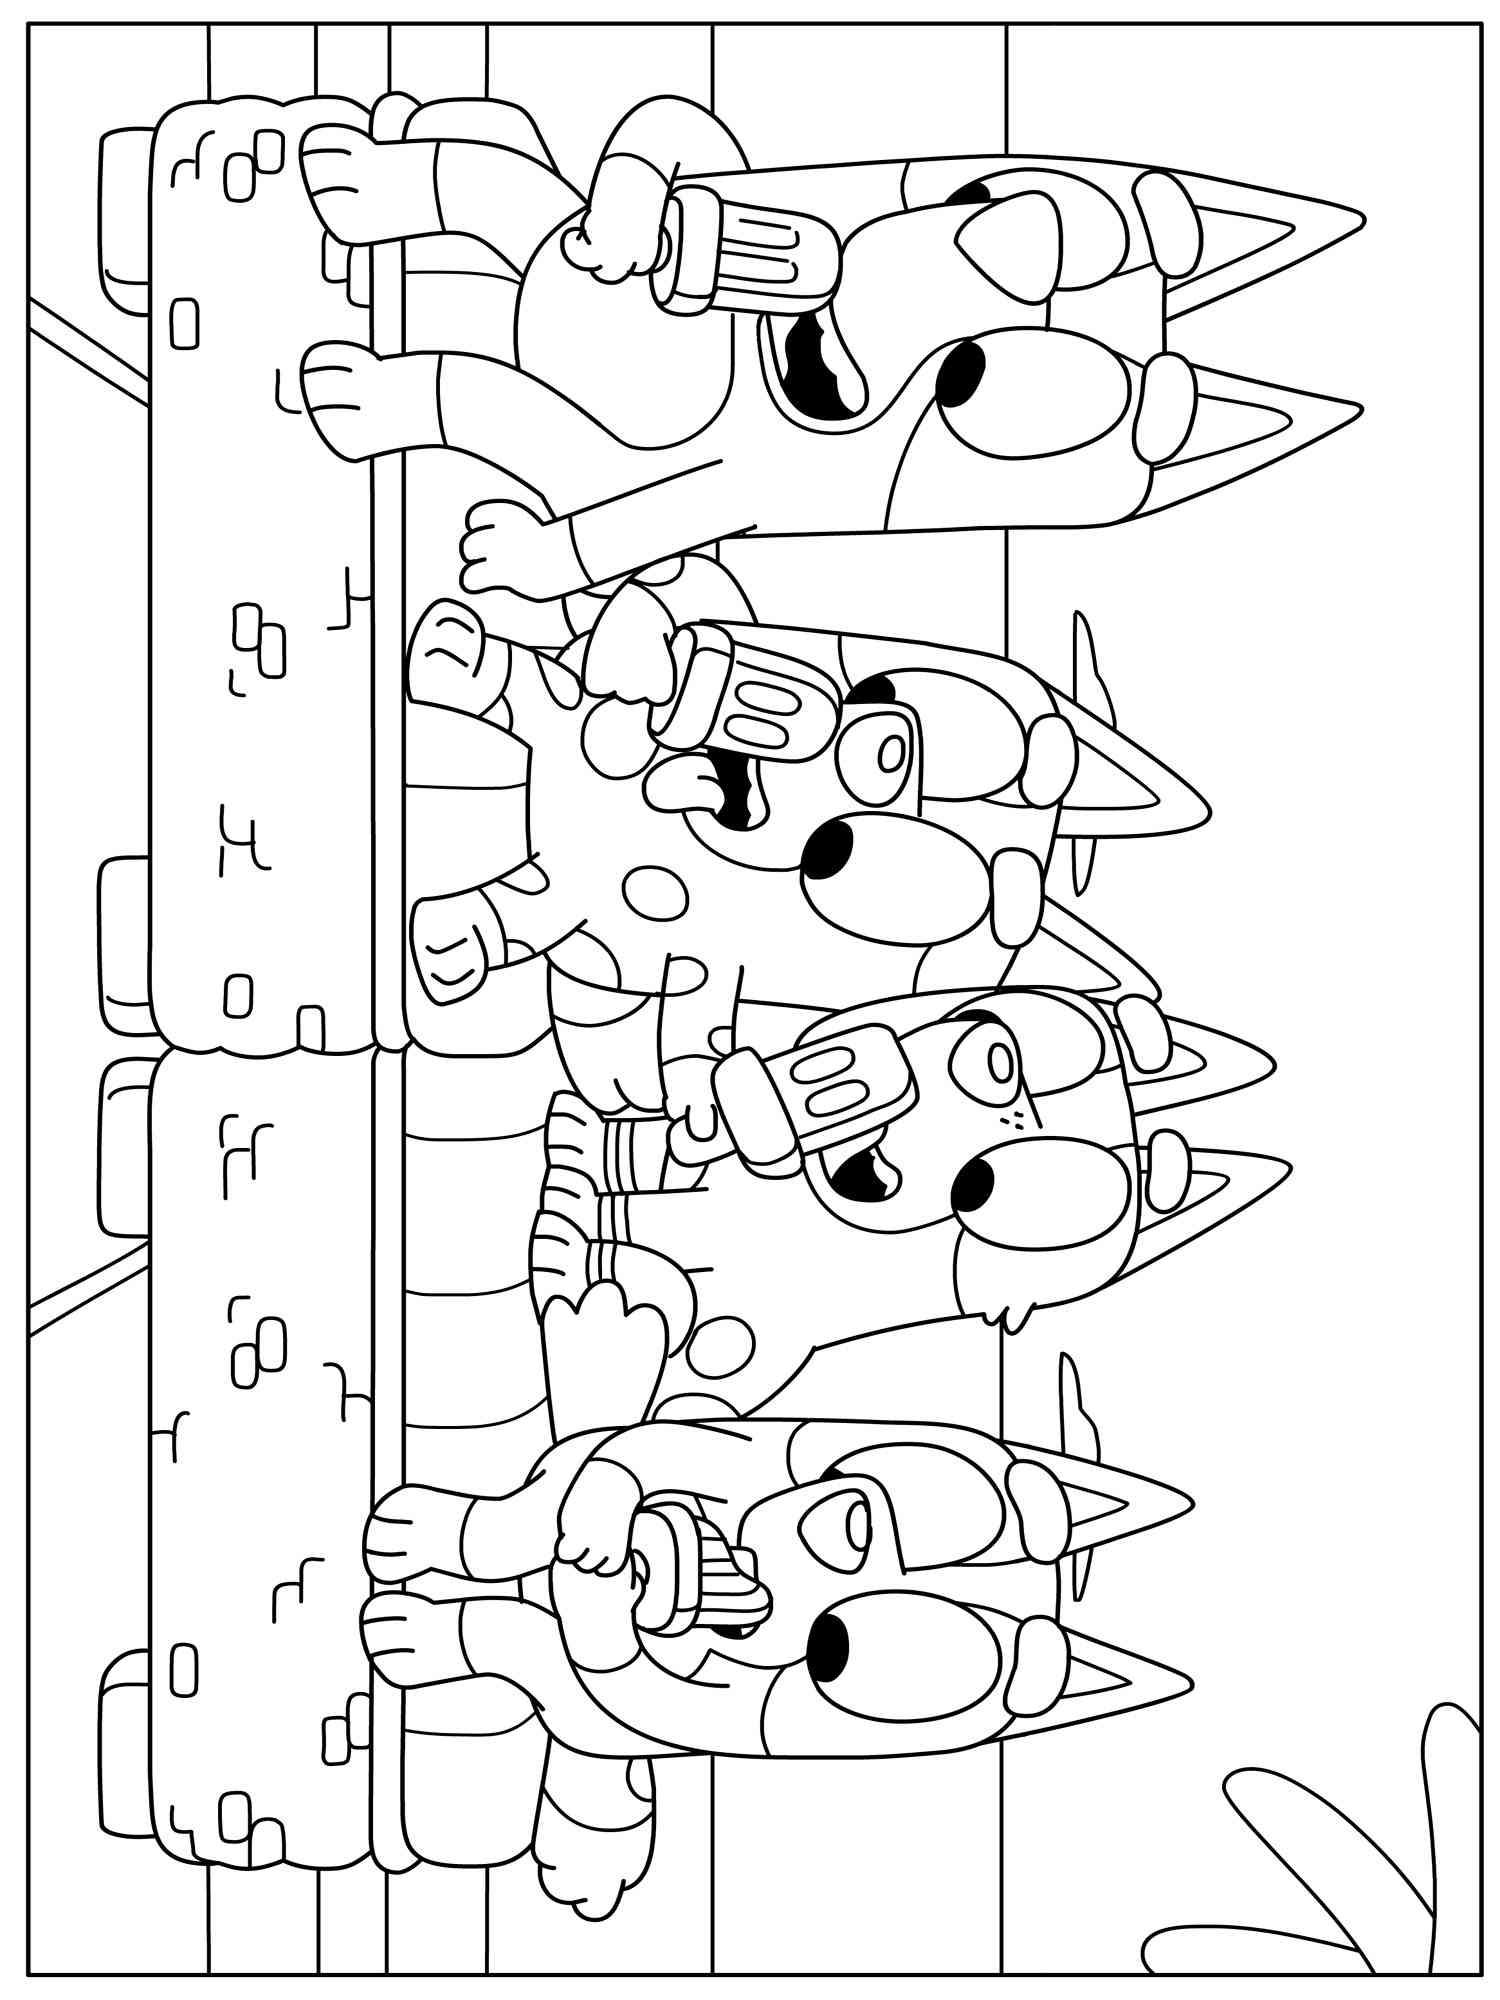 Bluey 8 coloring page